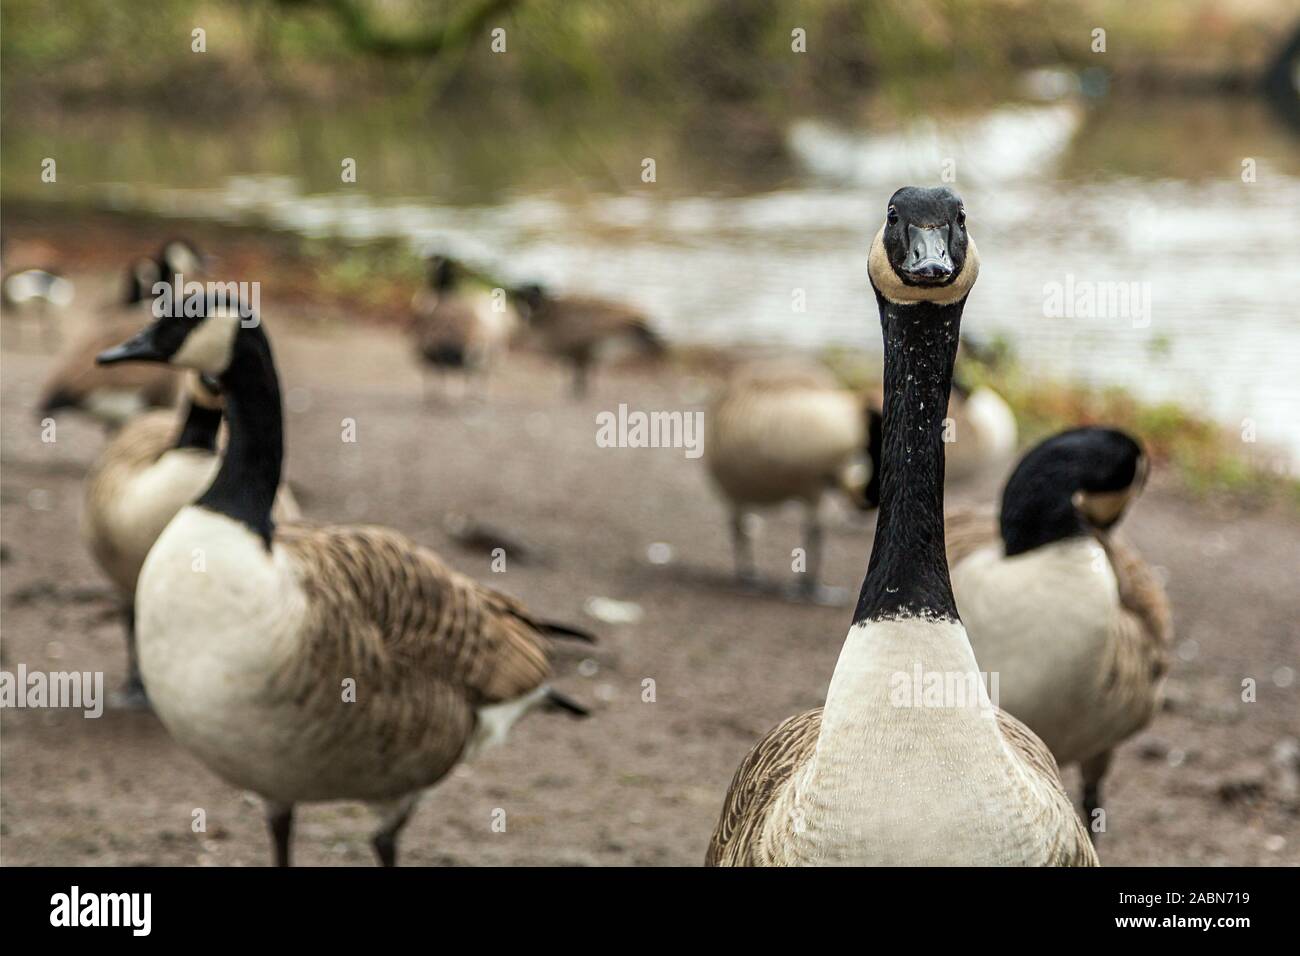 A group of Canada geese with only one in focus. Concept / conceptual staying focused, alert, leadership, independence, paying attention etc. Stock Photo